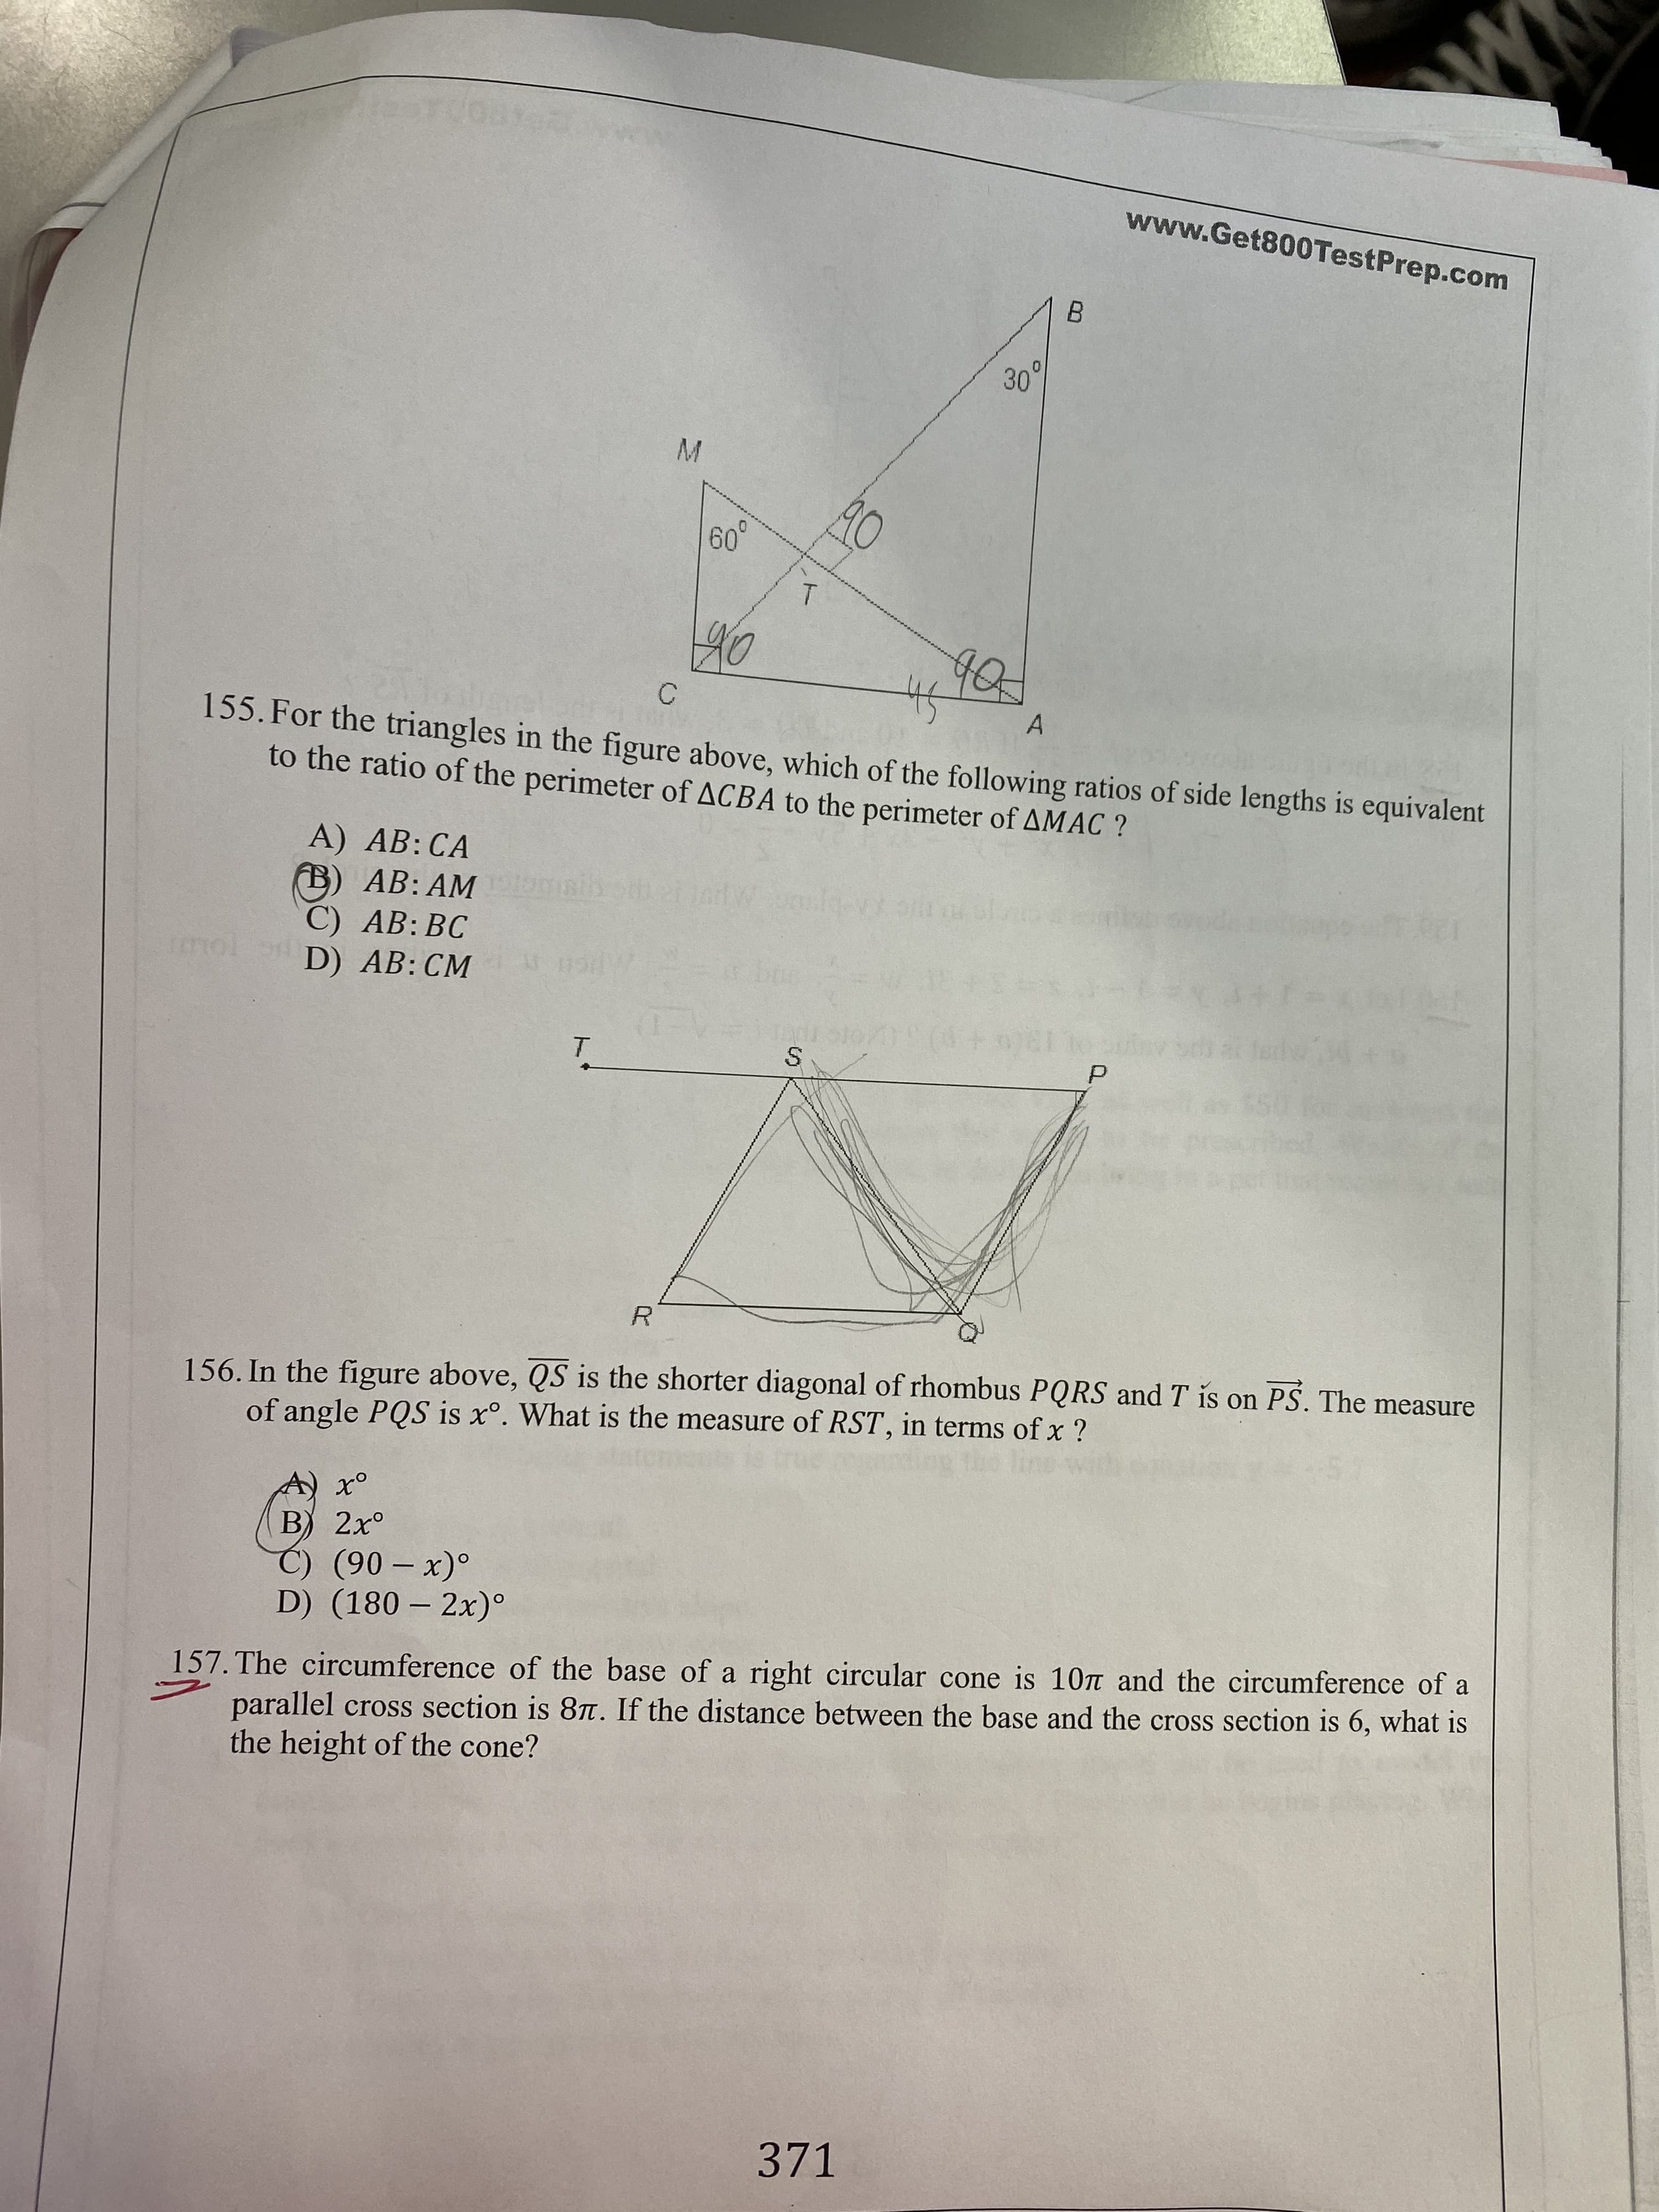 www.Get800TestPrep.com
30°
60°
90
40
155. For the triangles in the figure above, which of the following ratios of side lengths is equivalent
to the ratio of the perimeter of ACBA to the perimeter of AMAC ?
A) AB: CA
B) AB: AM
C) AB: BC
D) AB: CM
rmol
T.
R.
156. In the figure above, QS is the shorter diagonal of rhombus PQRS and T is on PS. The measure
of angle PQS is x°. What is the measure of RST, in terms of x ?
В) 2х°
C) (90 – x)°
D) (180 – 2x)°
157. The circumference of the base of a right circular cone is 10T and the circumference of a
parallel cross section is 8T. If the distance between the base and the cross section is 6, what is
the height of the cone?
371
ト
